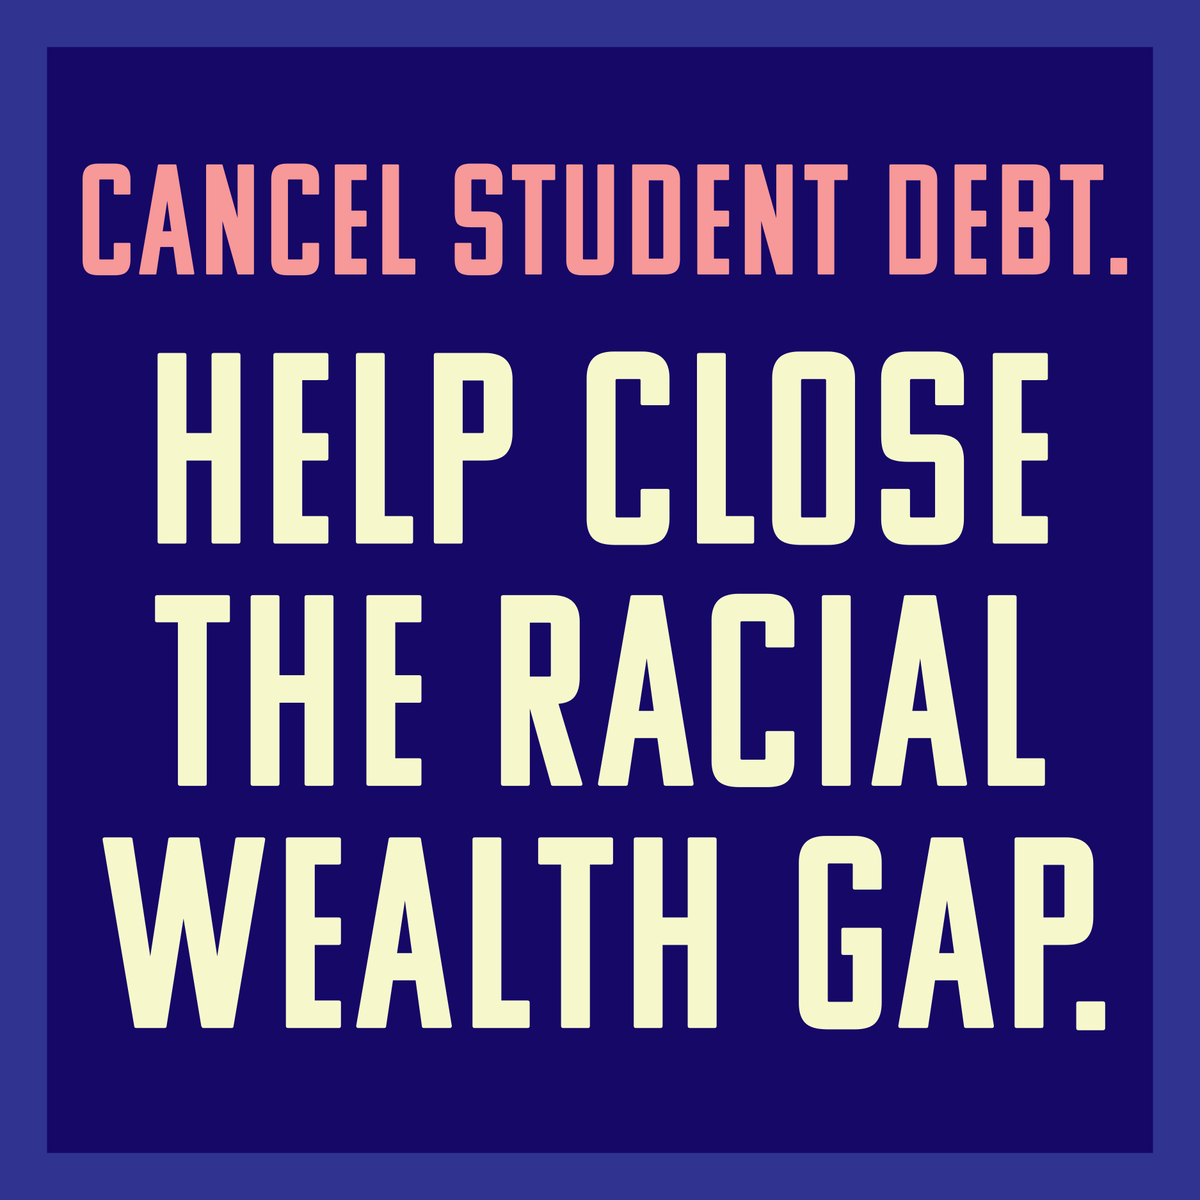 Failing to take swift, sweeping action to protect families with student debt will deepen economic inequality, widen the racial wealth gap, and lead to a new epidemic of student loan defaults.
#CancelStudentDebt #Juneteenth #StudentDebtPromise #ProtectBorrowers